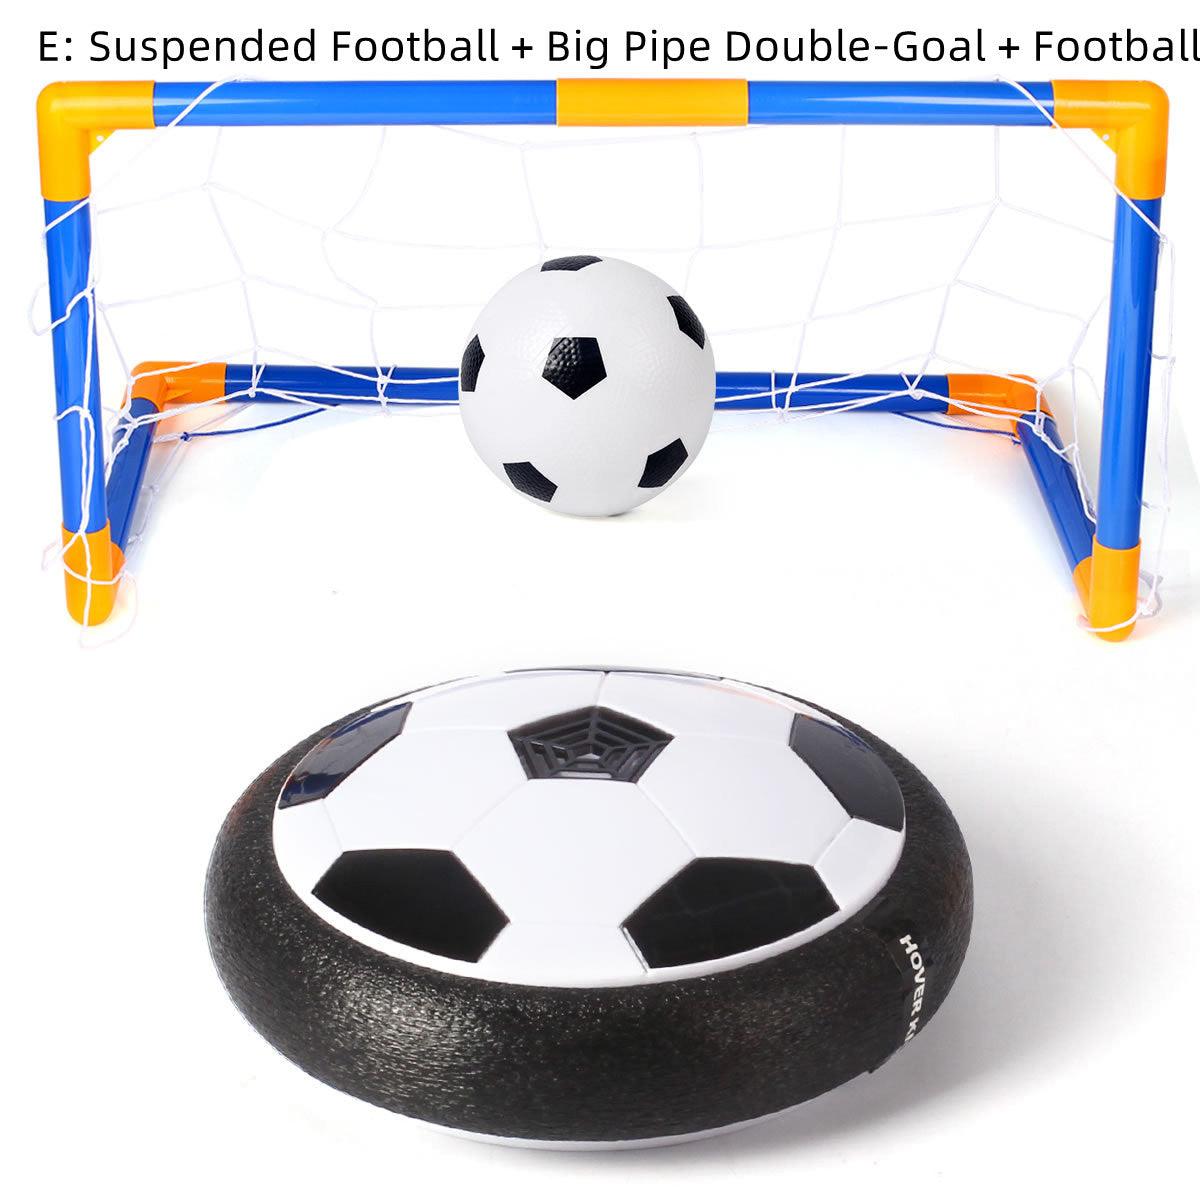 Air Power Hover Soccer Ball Football For Babi Child Toy Ball Outdoor Indoor Children Educational Toys For Kids Games Sports